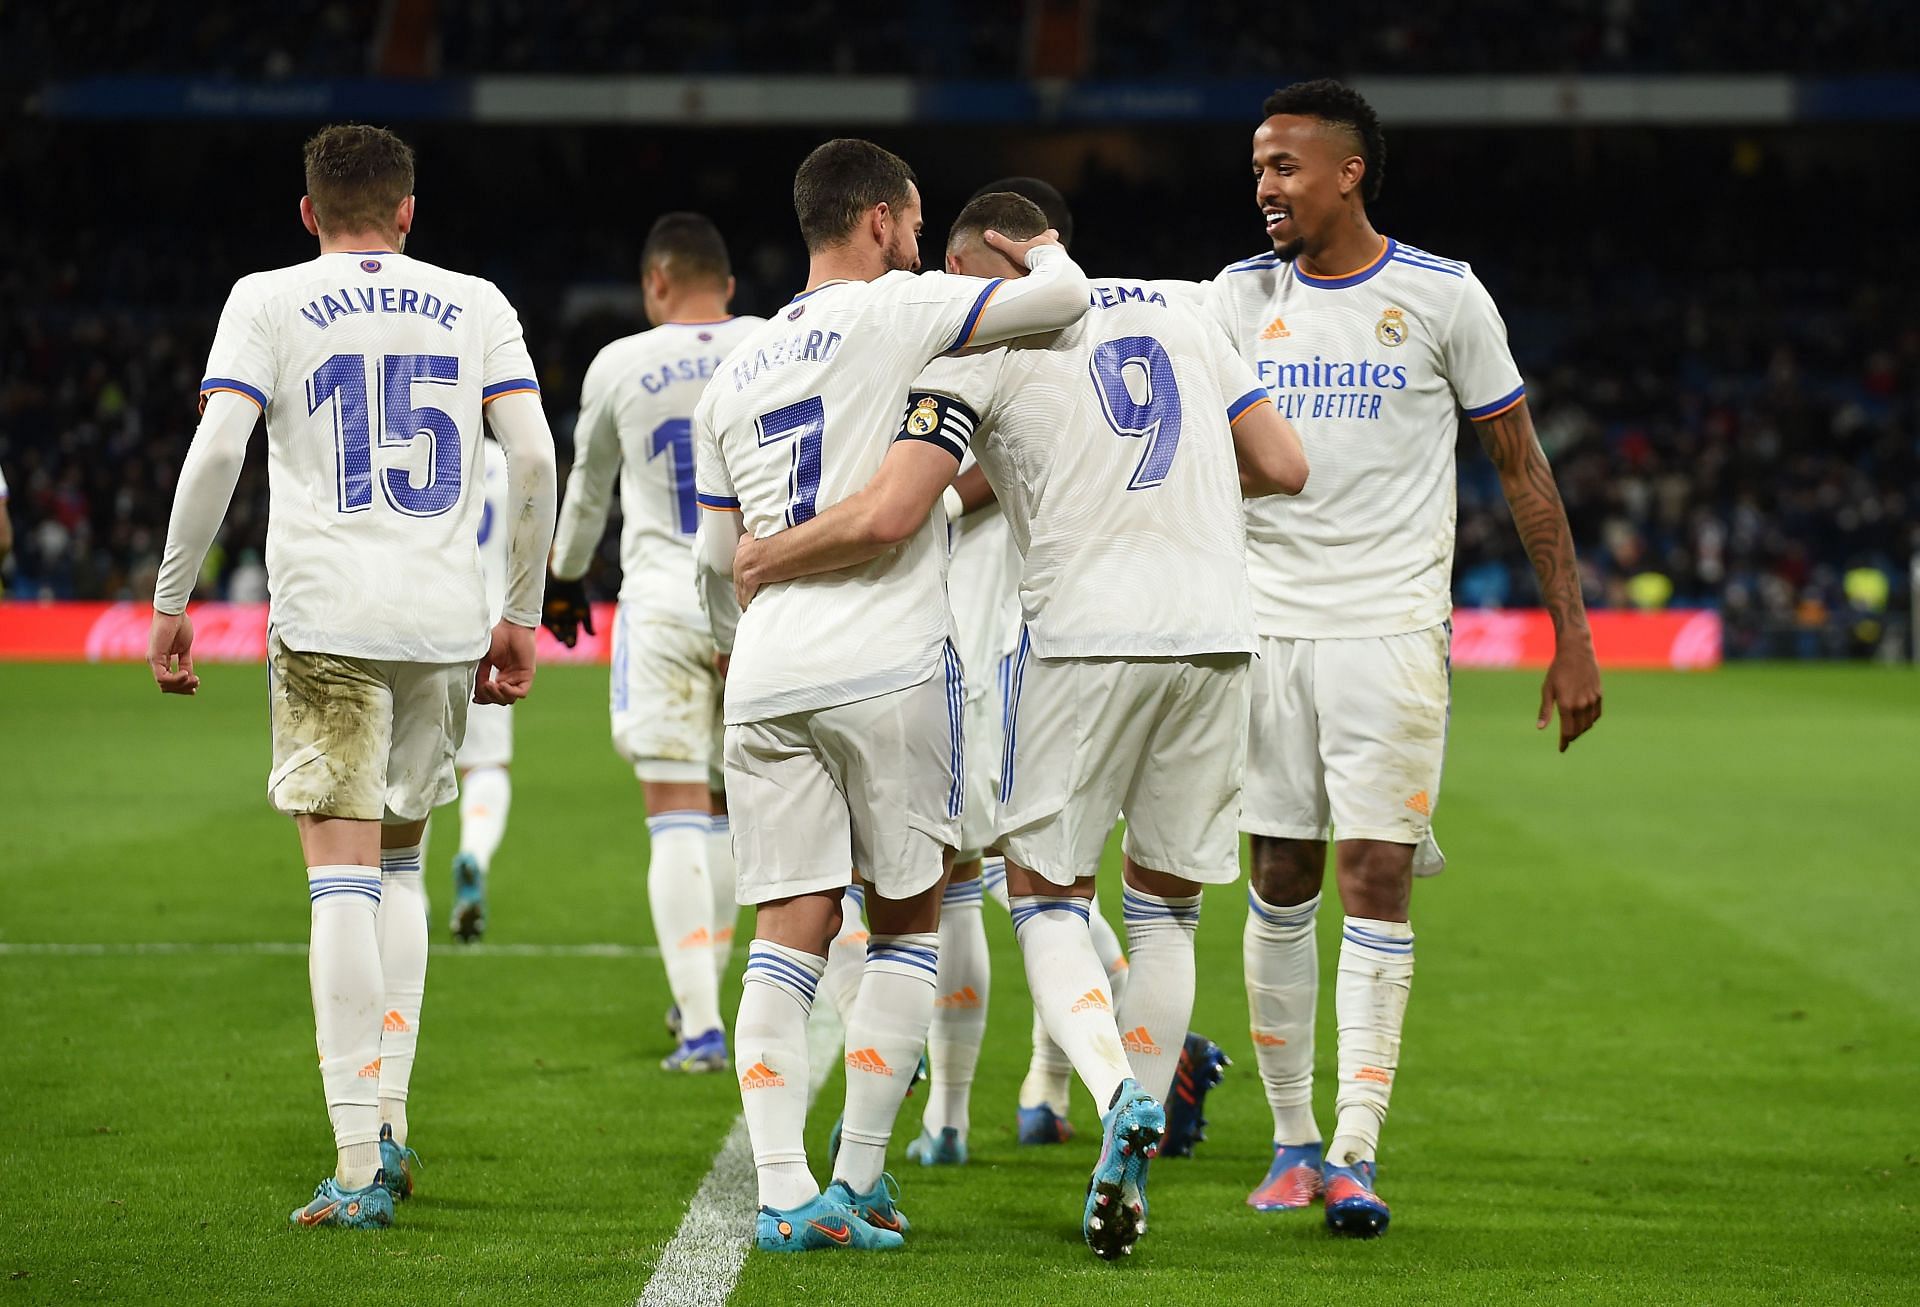 Real Madrid players celebrate after scoring a goal.